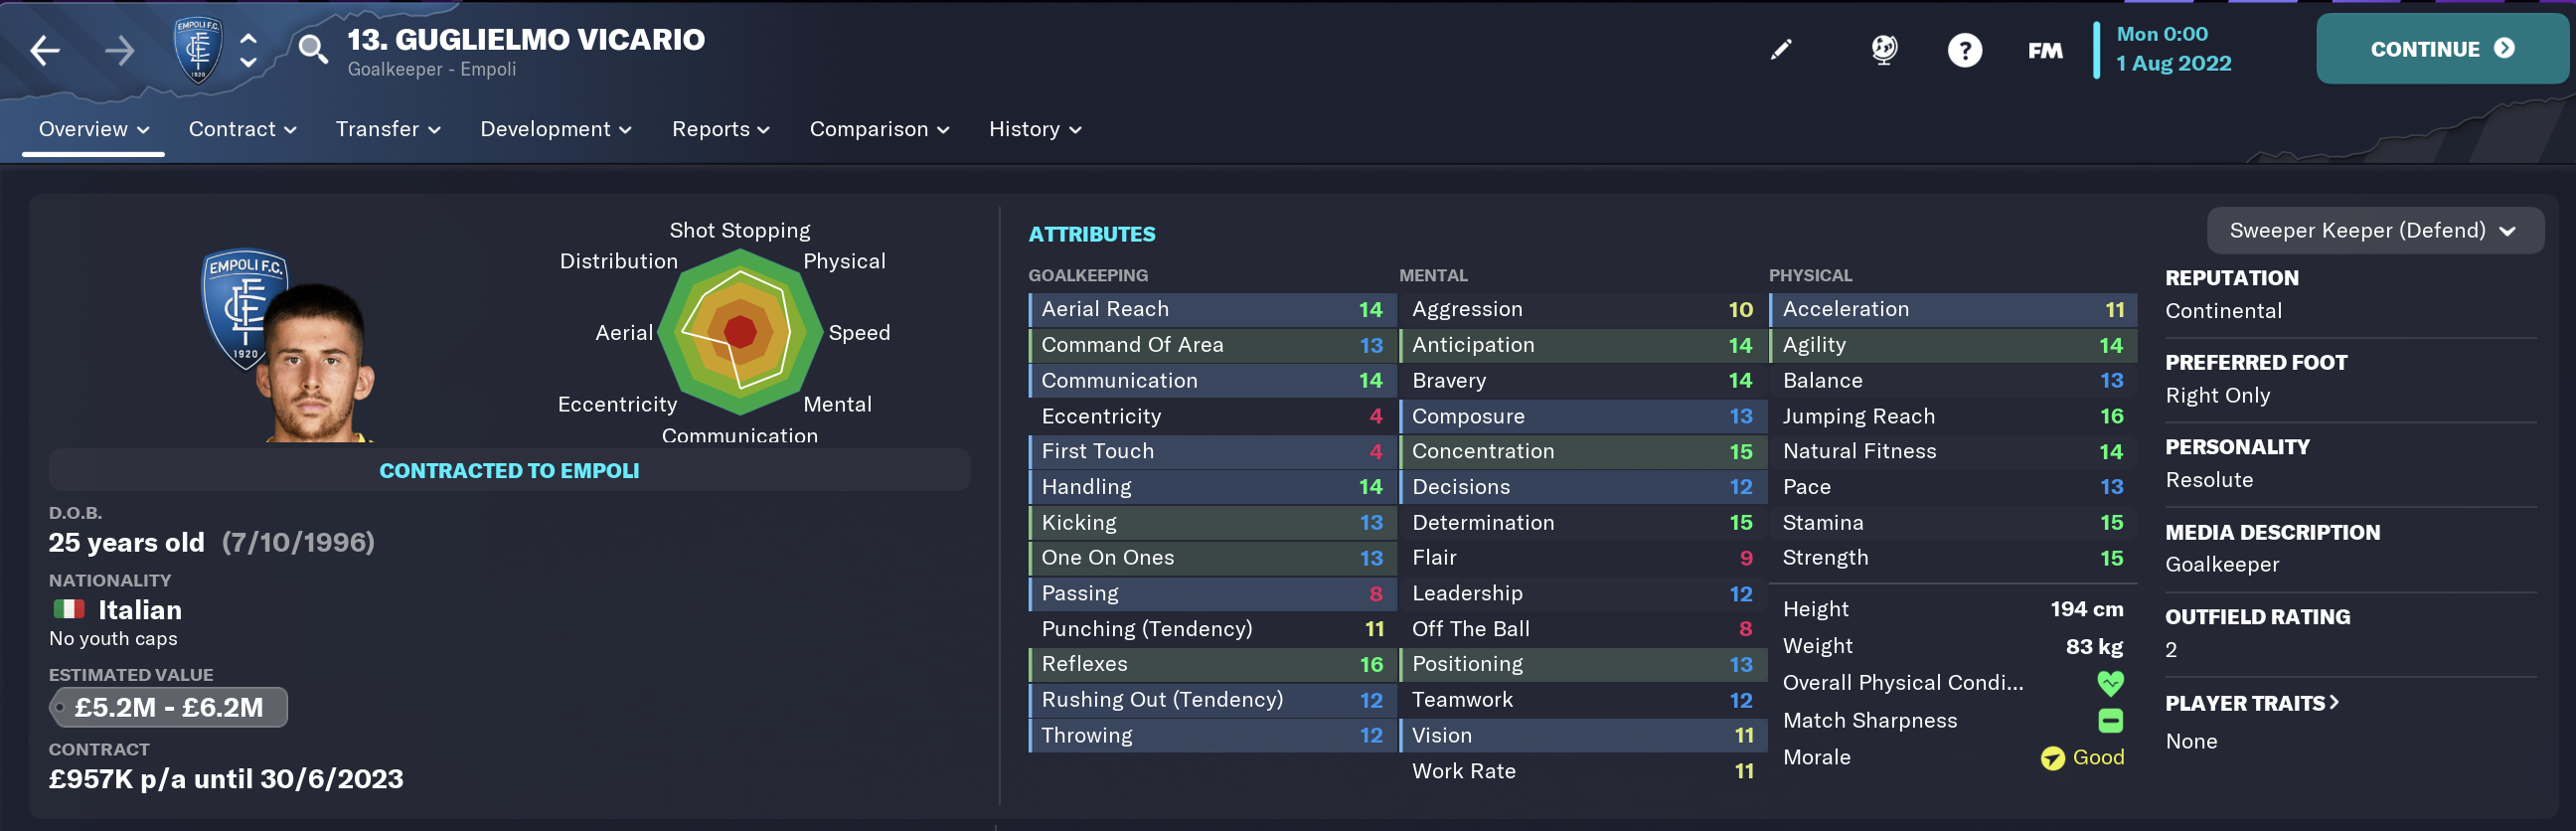 Best FM 2023 Goalkeepers Guillermo Vicario